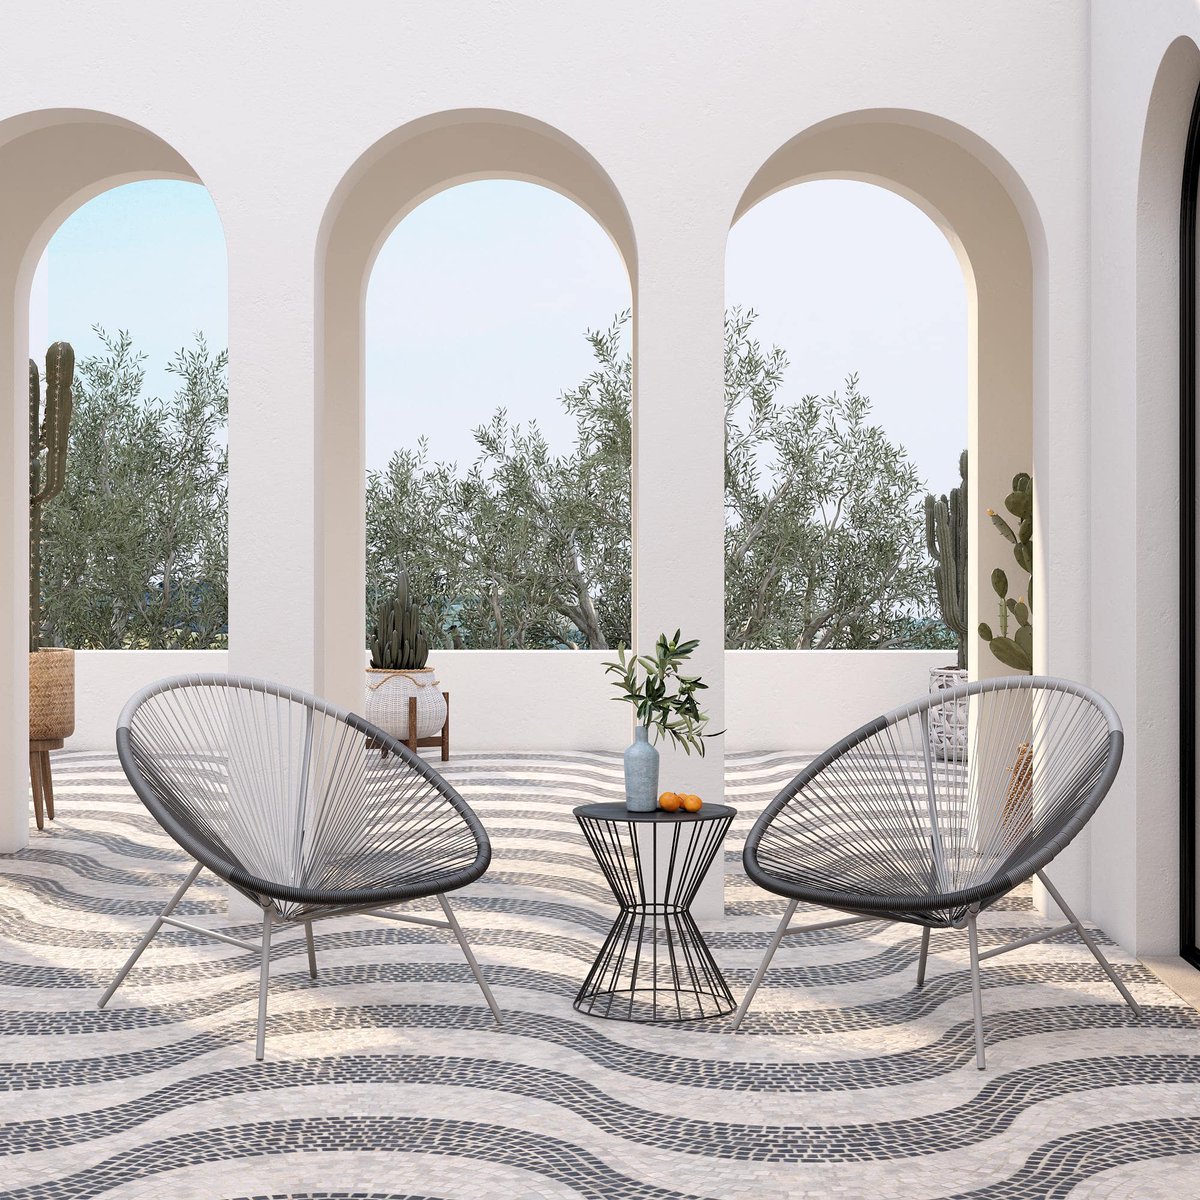 FINALLY! Spring is here! Enjoy the sunshine in style with a superb patio set. Styles to suit budgets and space available.

pricecrashfurniture.co.uk/collections/ta…

#outdoorfurniture #patioset #Novogratz #Cosco #barstools #diningset #diningtable #roberta #rockingchair #diningchairs #SanFrancisco